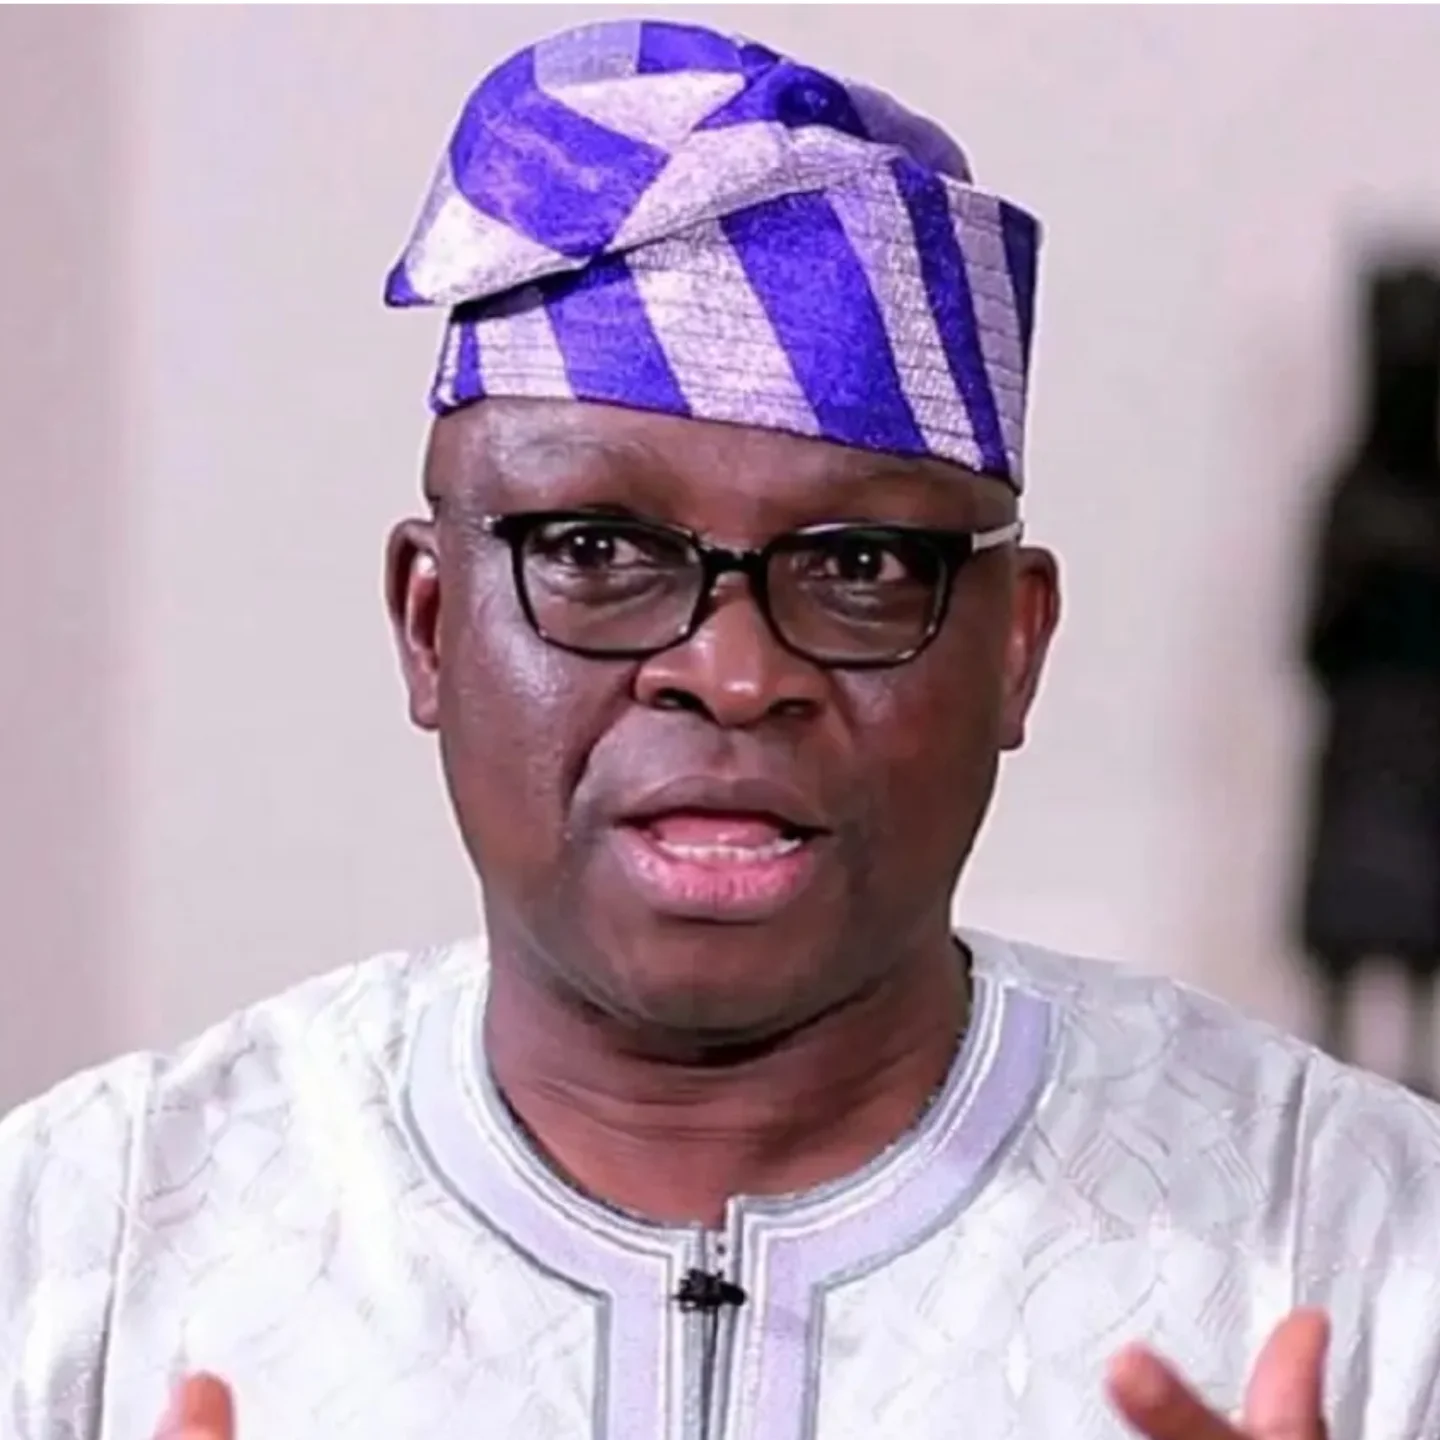 Fayose Warns: I'll Confront Tinubu If Promises Are Broken